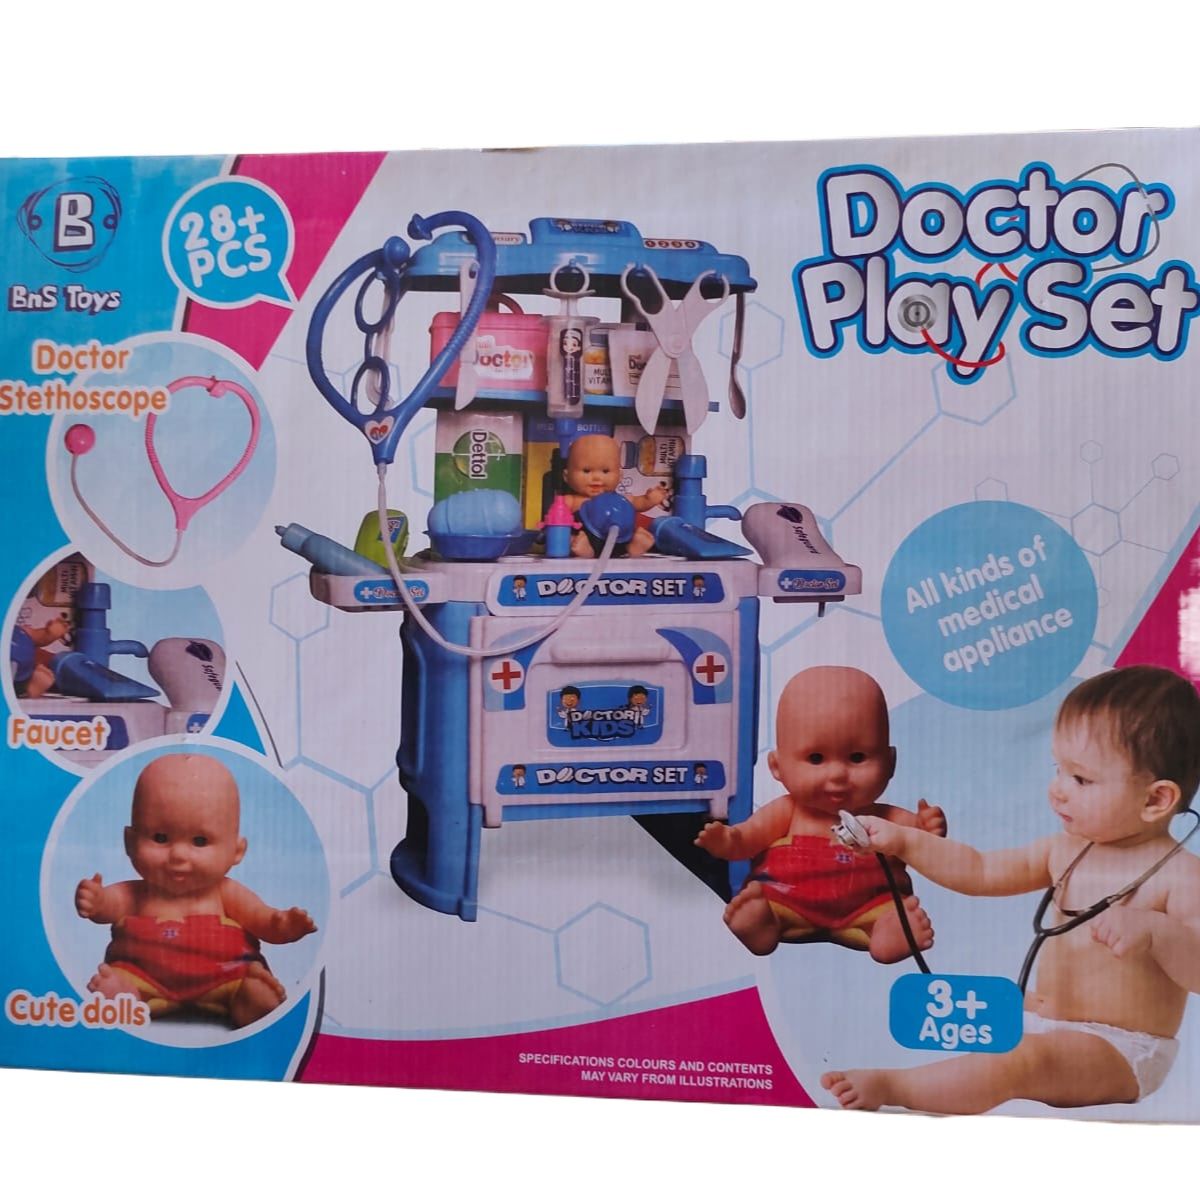 Doctor Play Set For Kids 28 Pcs Pretend Play Doctor Set in Upto 1.5ft Height